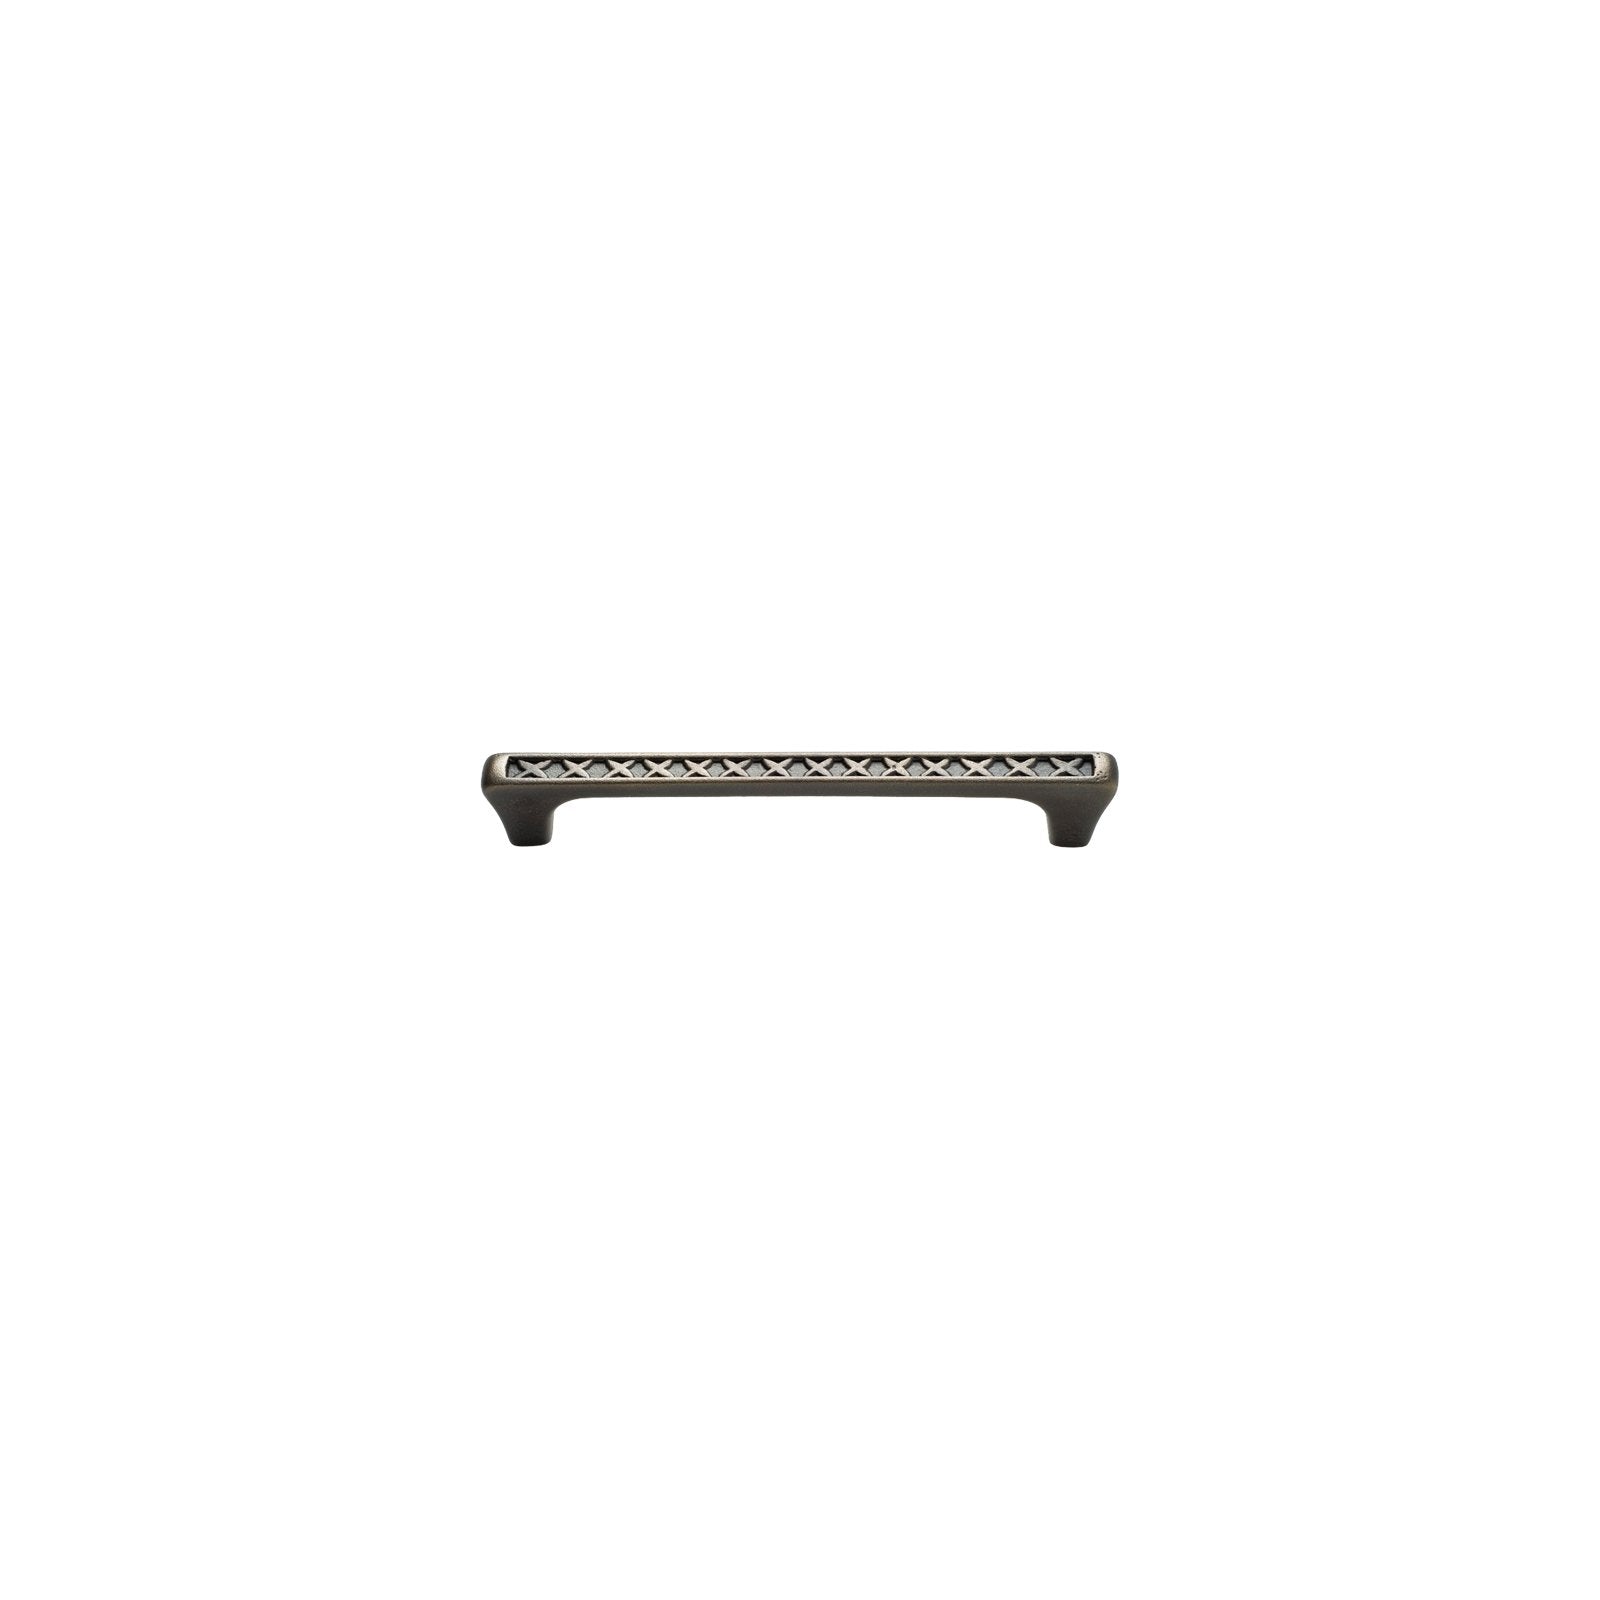 Rocky Mountain Hardware CK10851 - 6" C-to-C Crosshatch Cabinet Pull